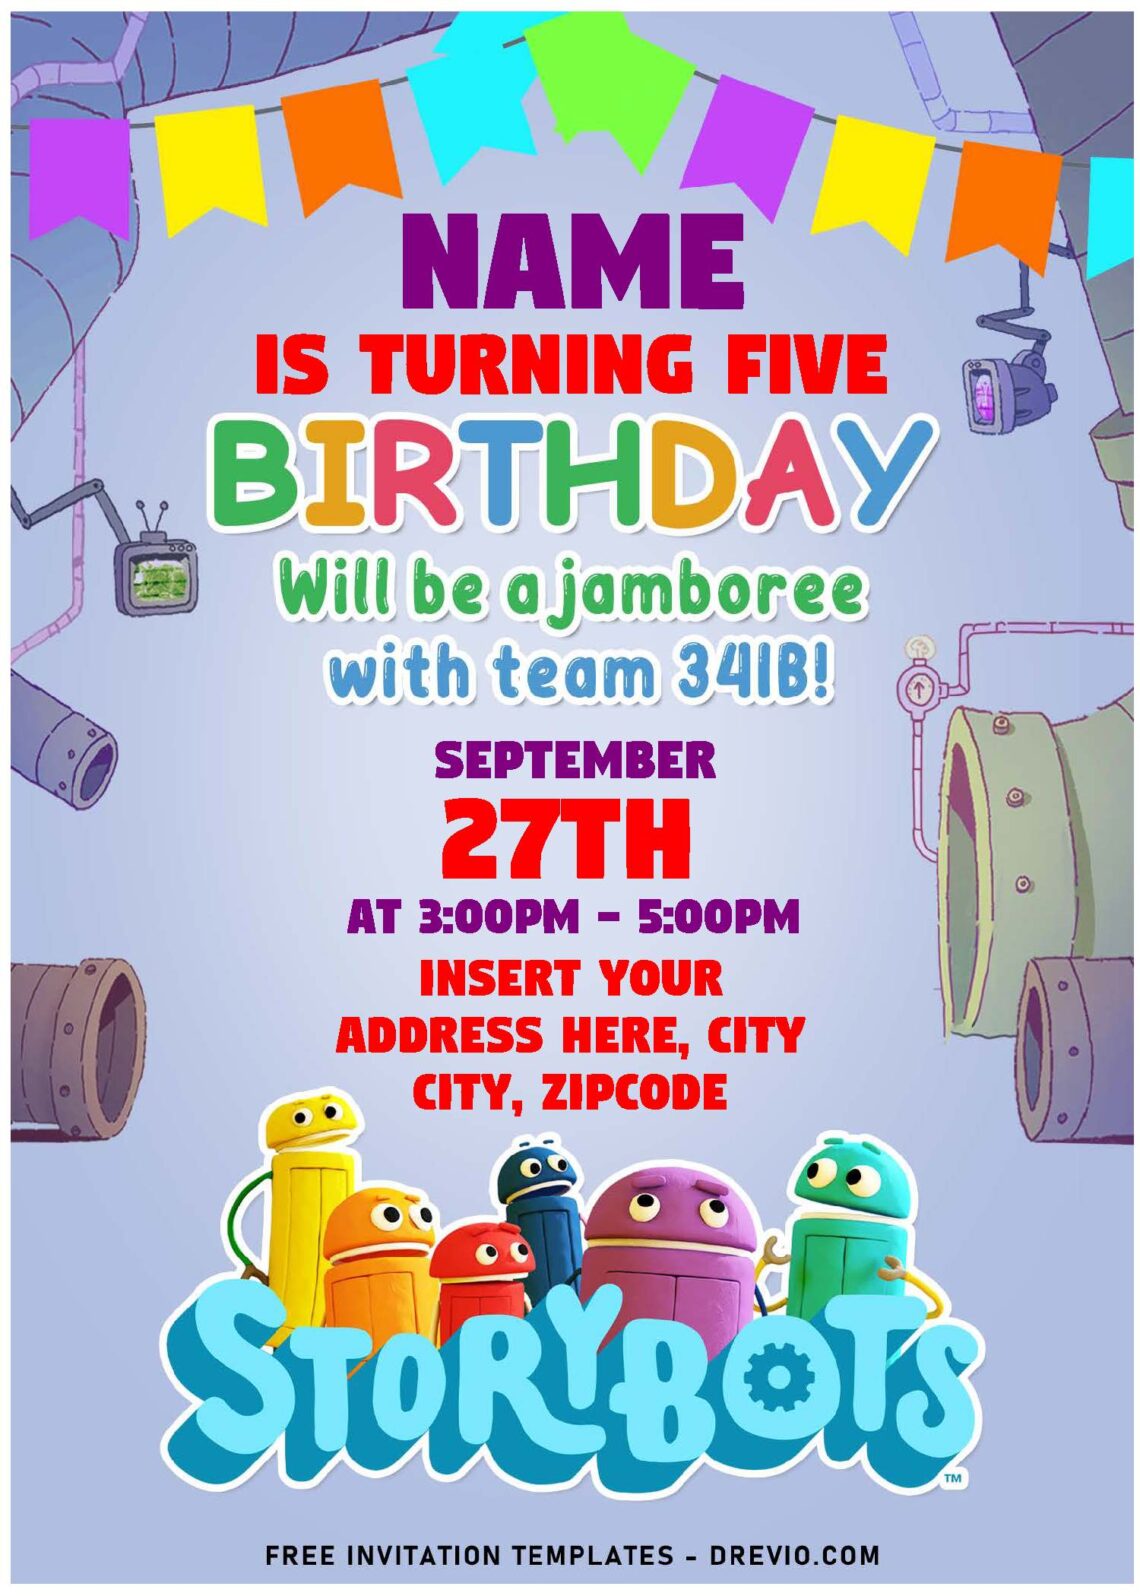 (Free Editable PDF) Friendly And Funny StoryBots Birthday Invitation Templates with colorful text